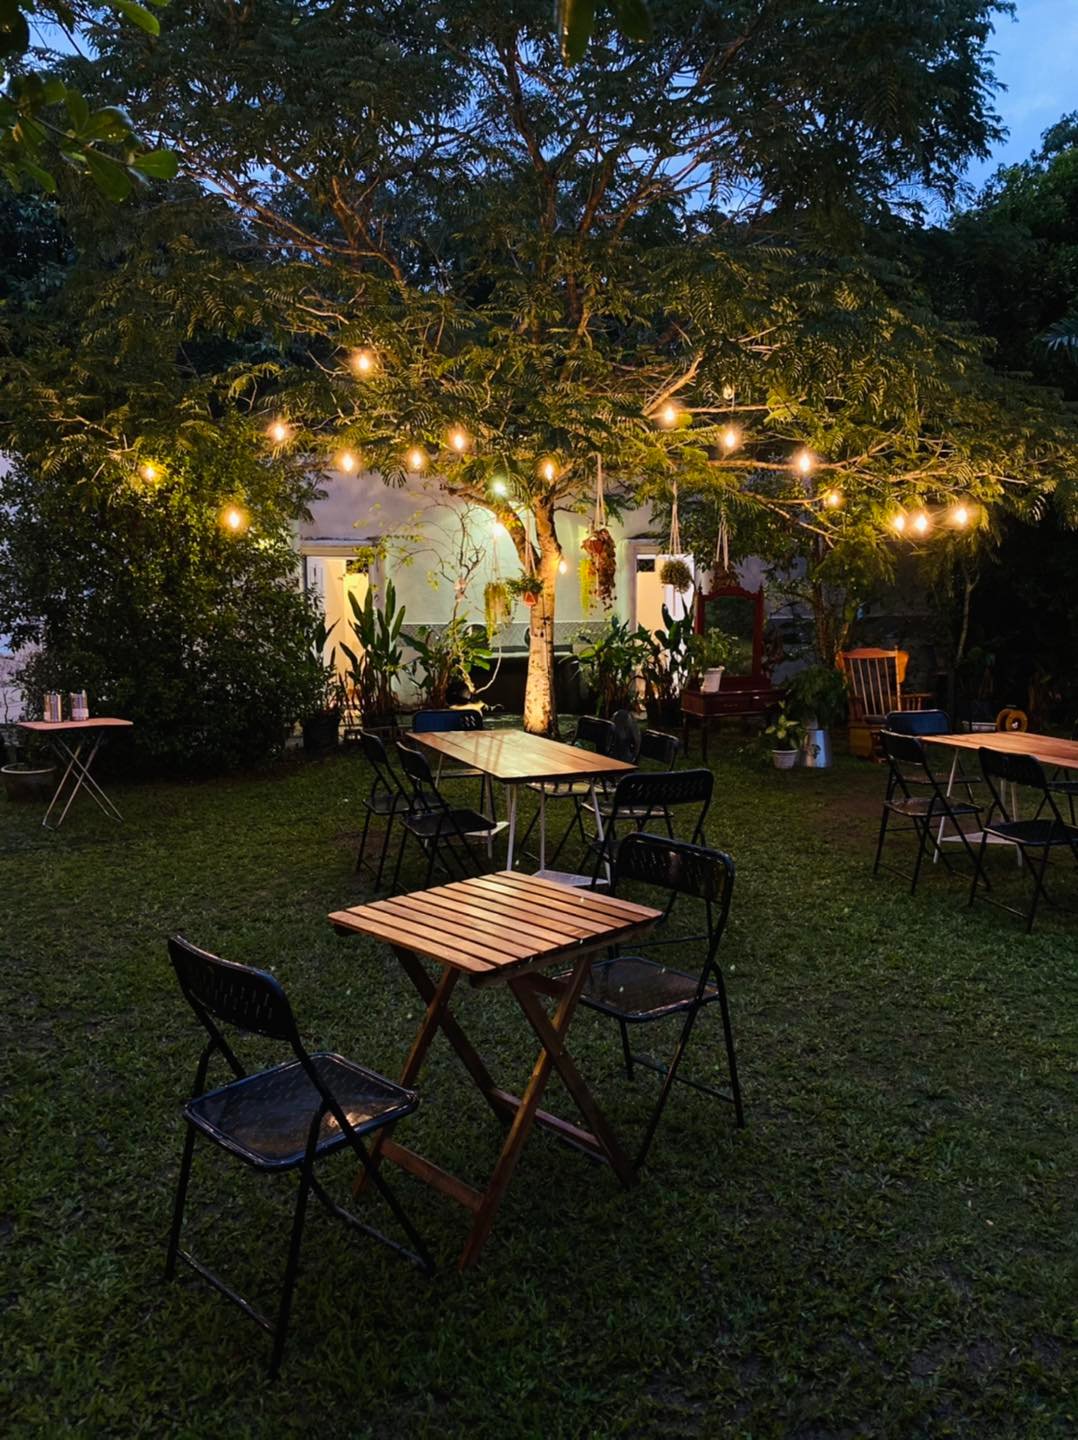 Nature-themed cafes near JB checkpoint - lune24 garden seating